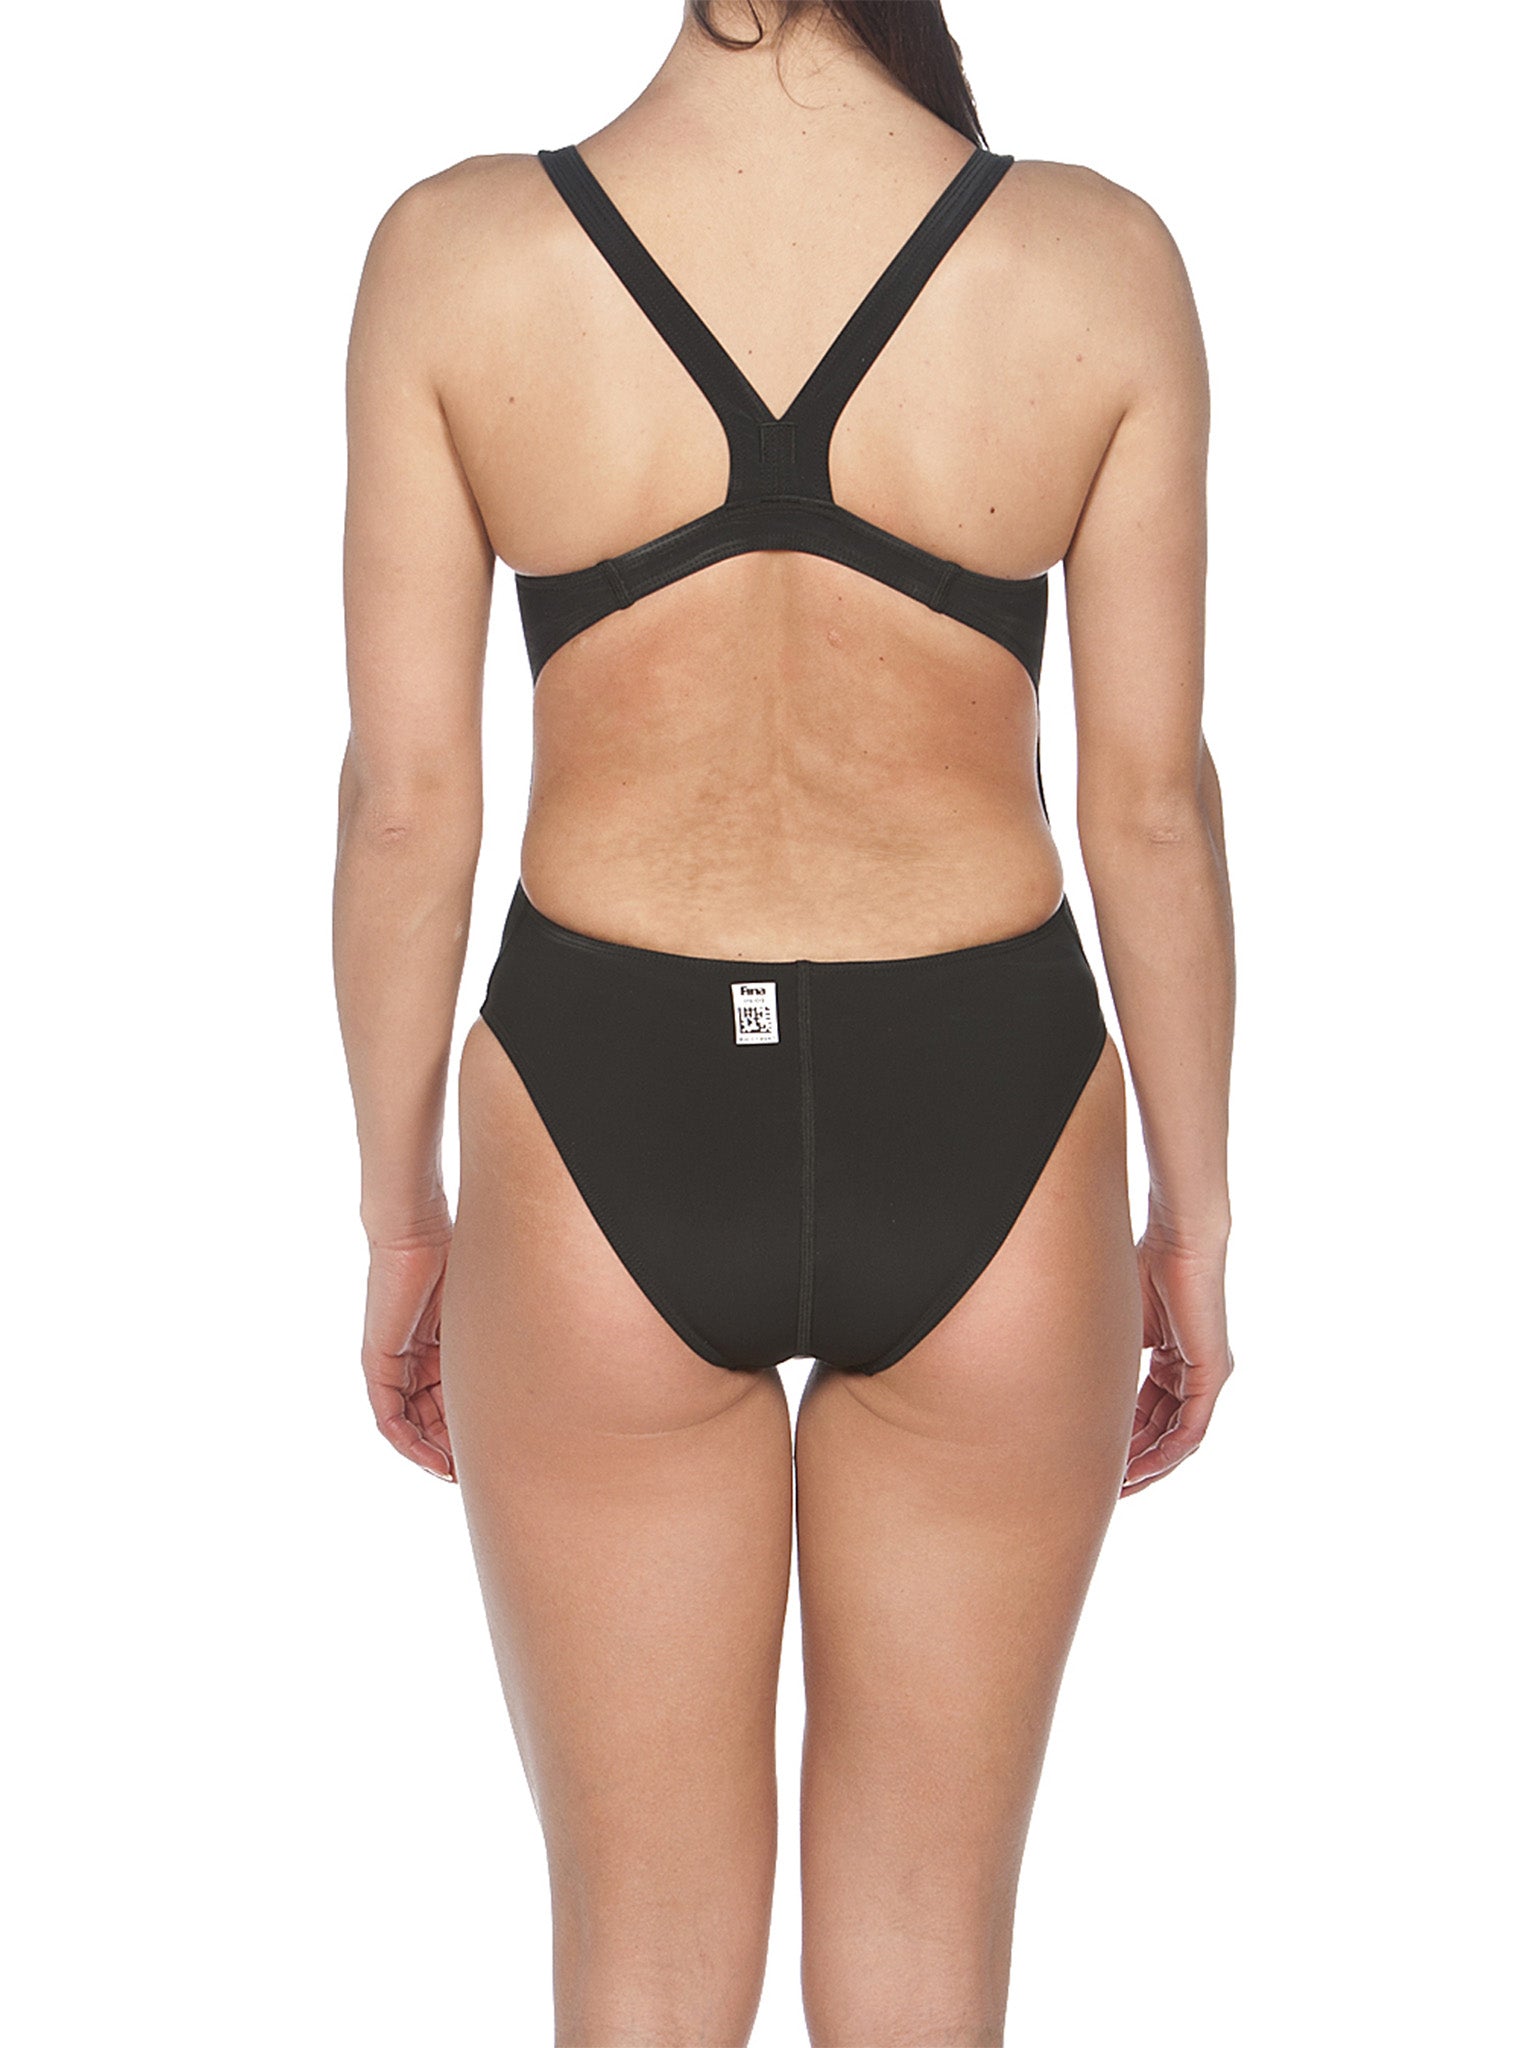 Powerskin St Classic femme - Dos Ouvert